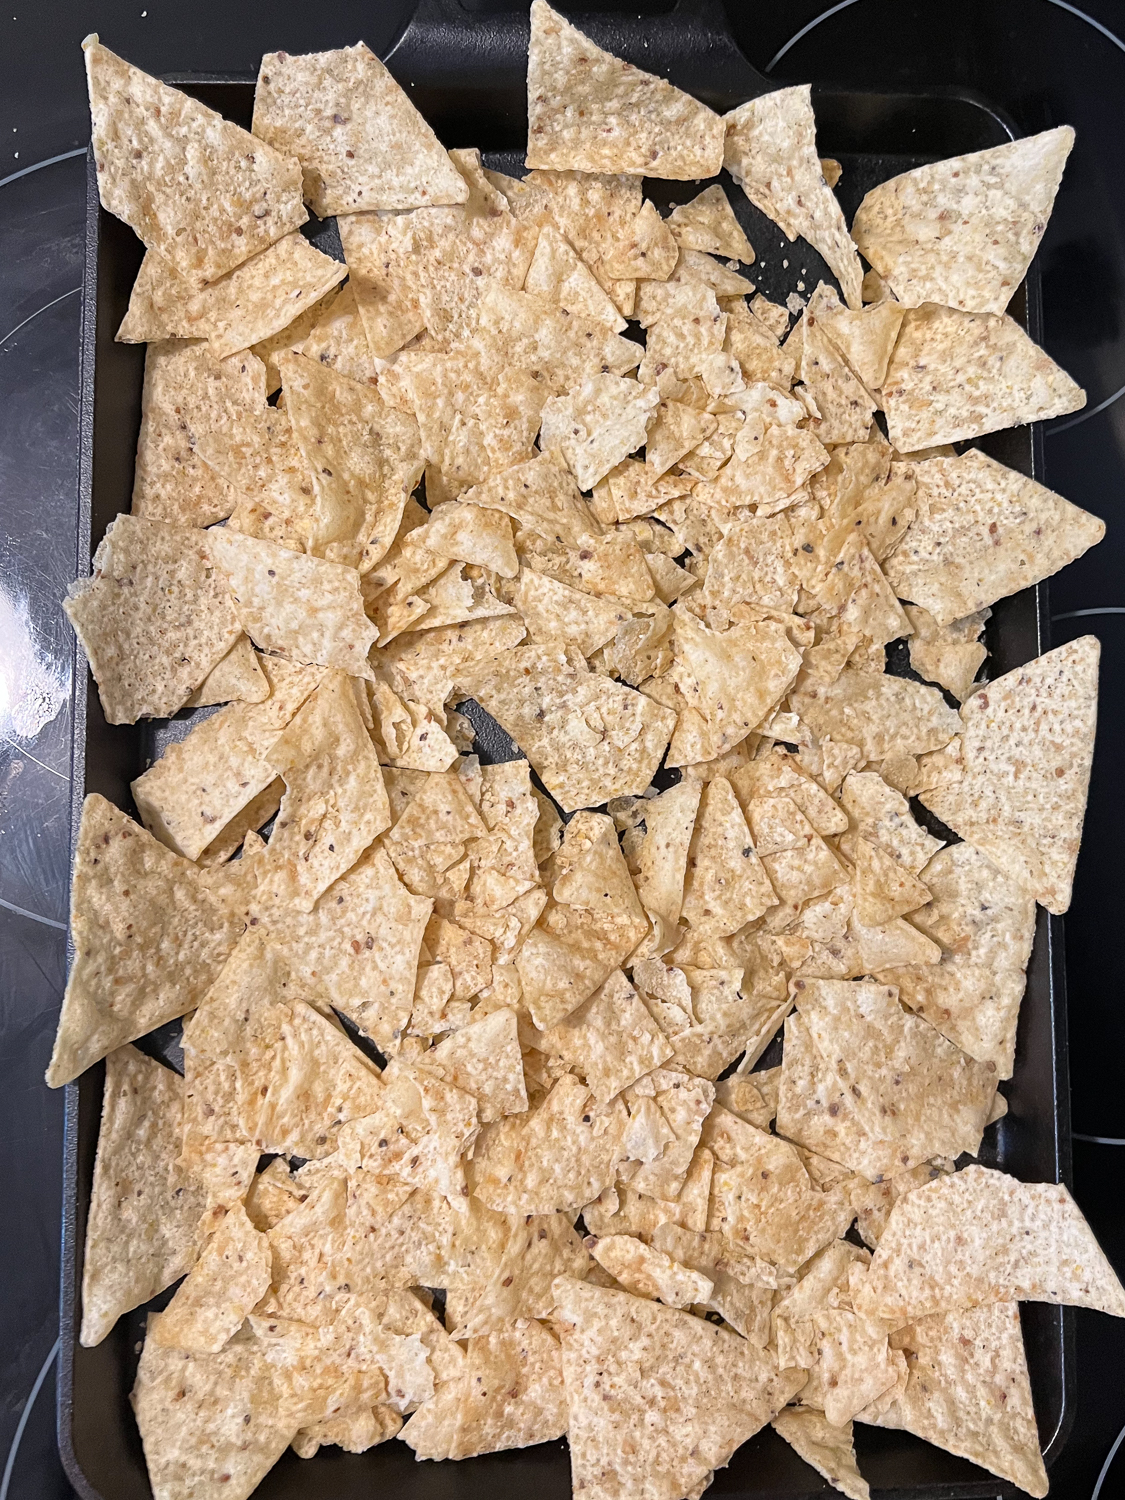 A thin layer of tortilla chips arranged on a cast iron baking tray.